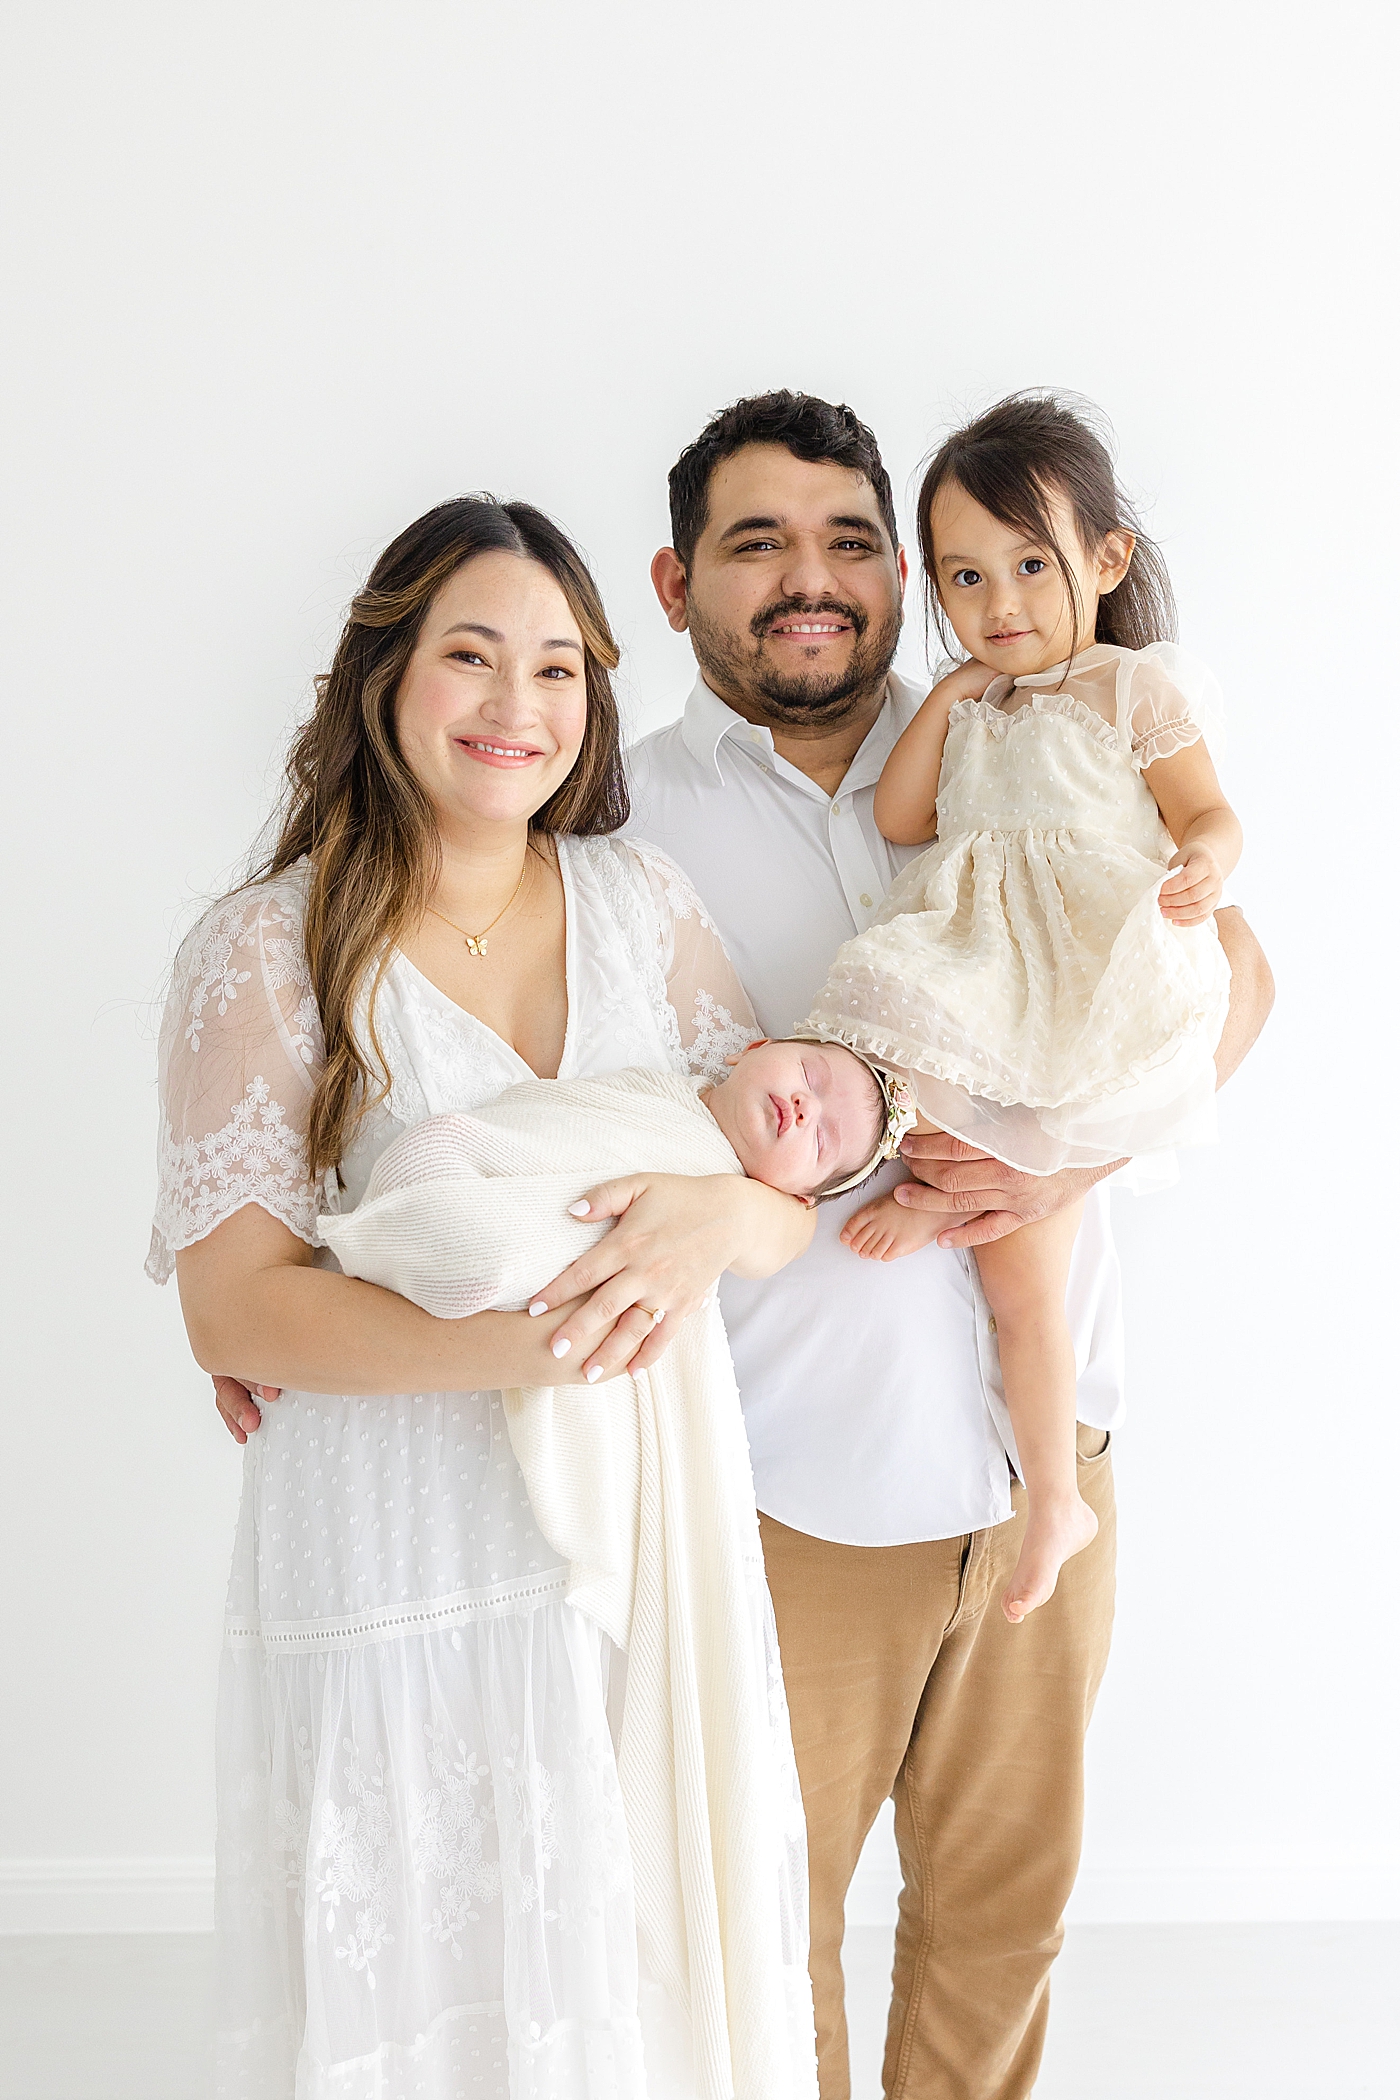 Family holding their new baby during her Austin Studio Newborn Session | Photo by Sana Ahmed Photography